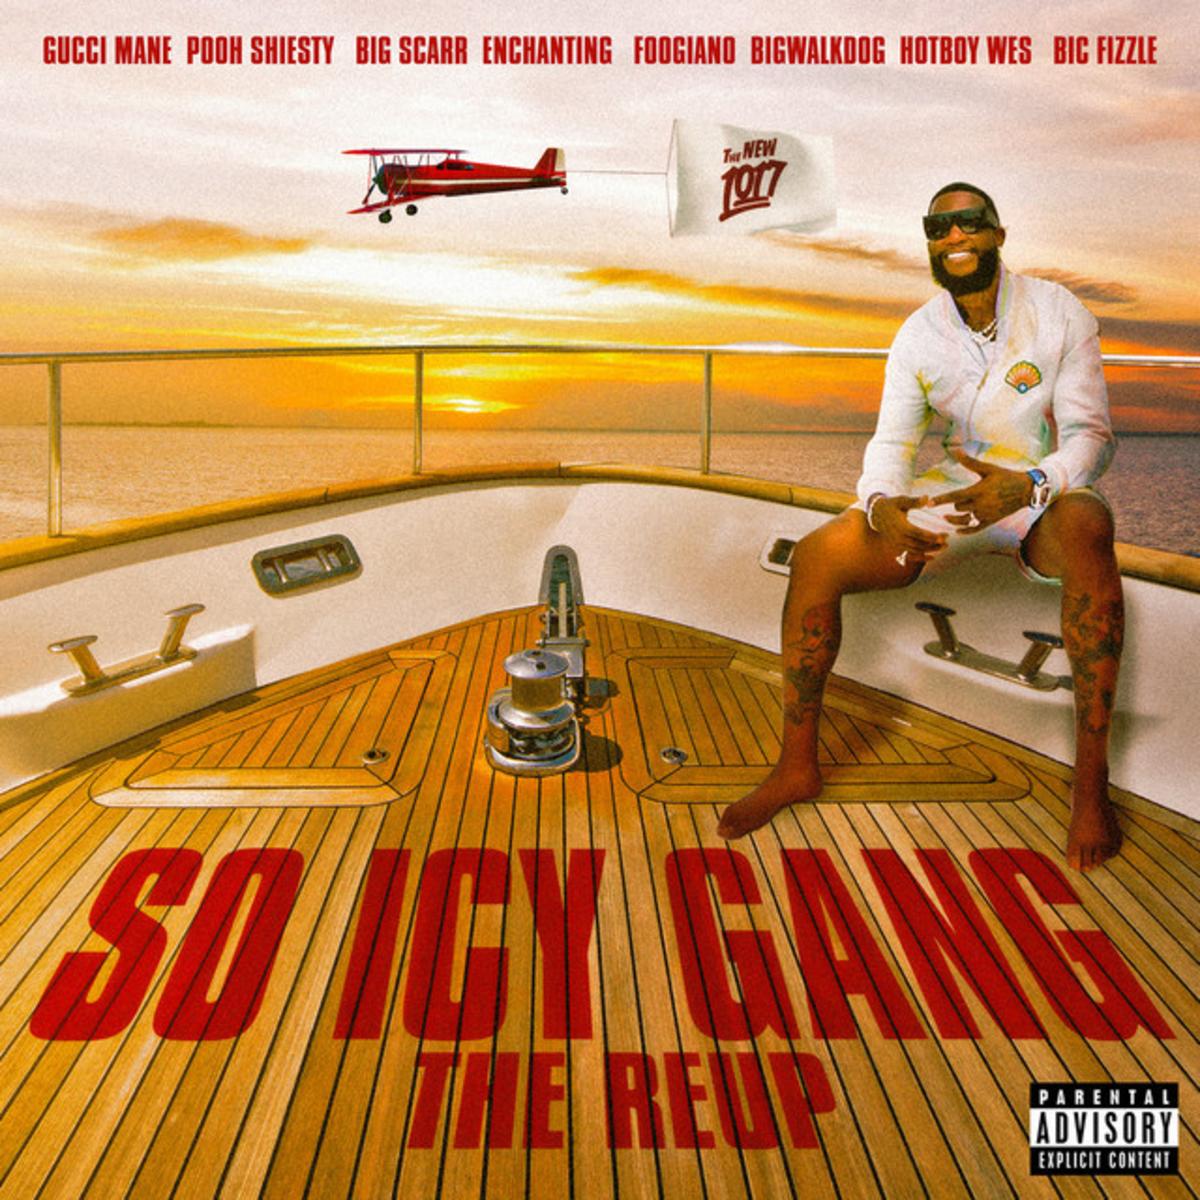 Listen To “So Icy Gang: The ReUp” By Gucci Mane